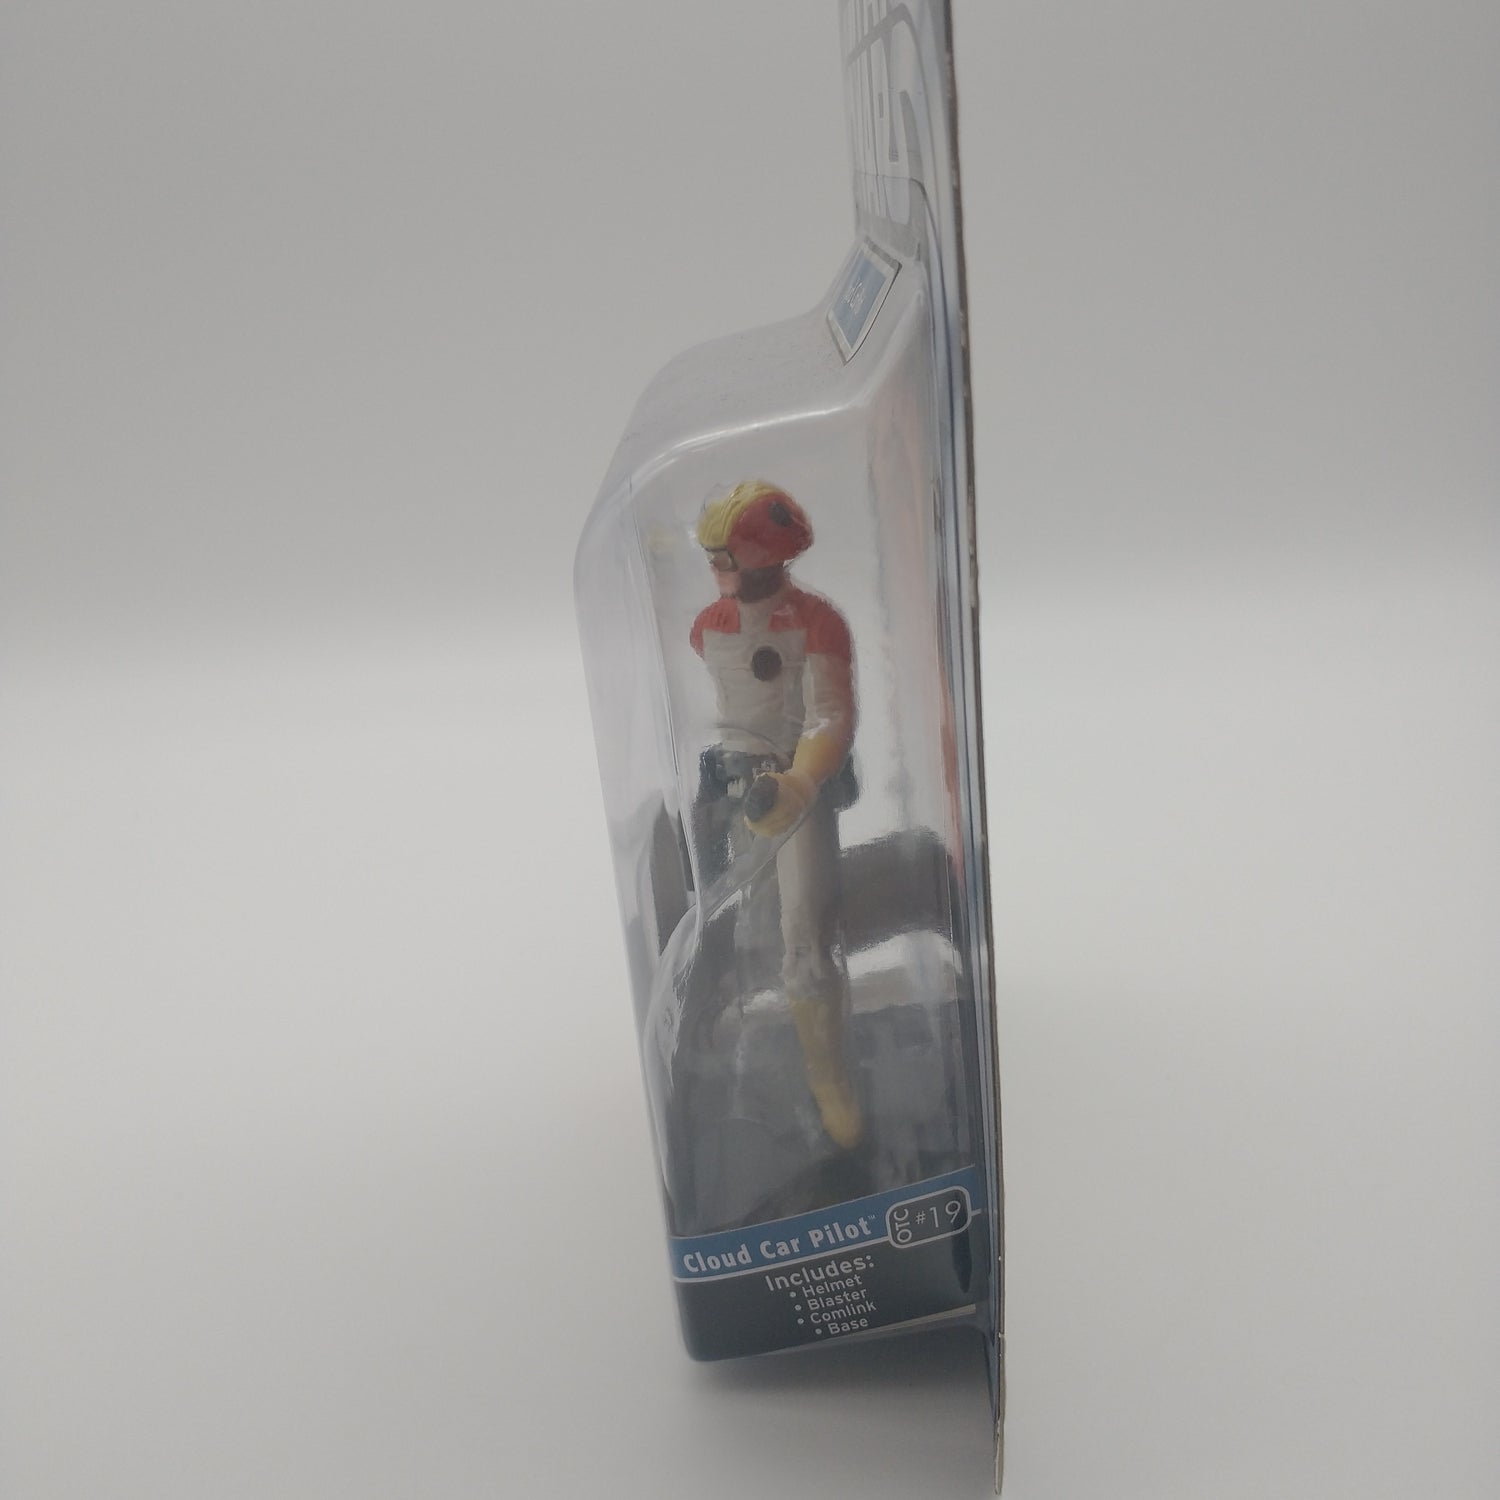 A picture of the left side of the cart and bubble. The action figure is inside.